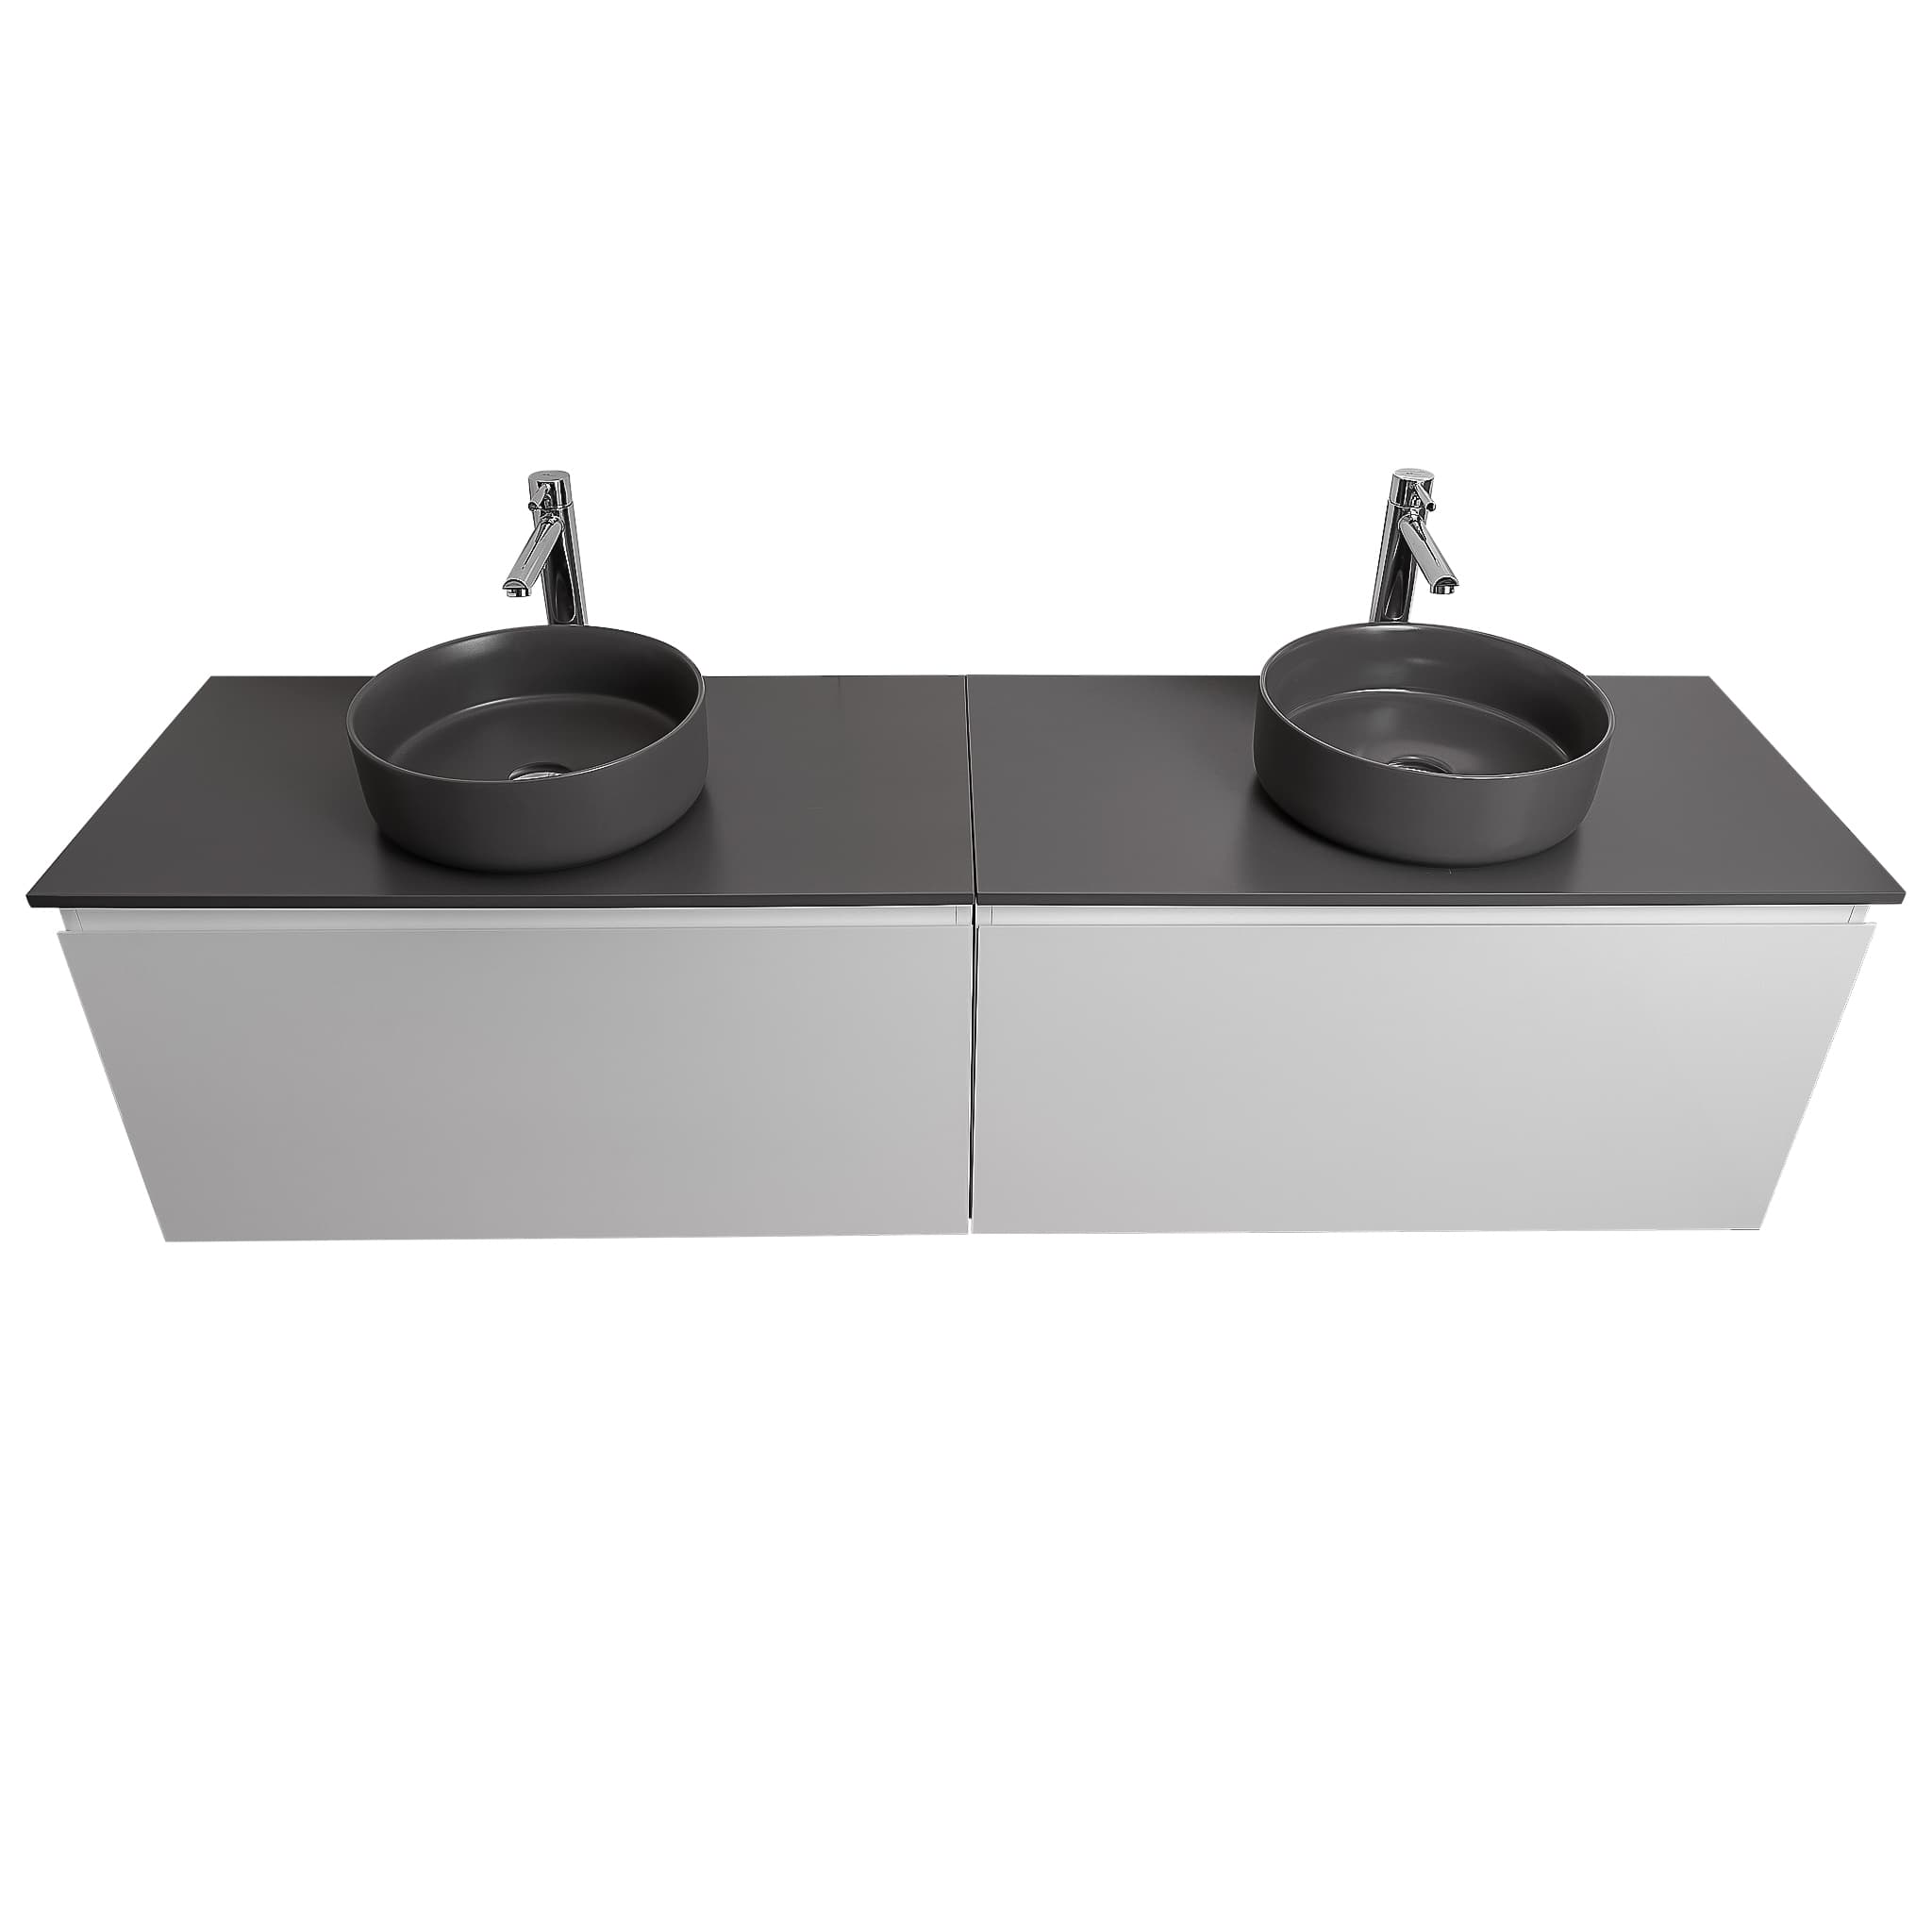 Venice 72 White High Gloss Cabinet, Ares Grey Ceniza Top And Two Ares Grey Ceniza Ceramic Basin, Wall Mounted Modern Vanity Set